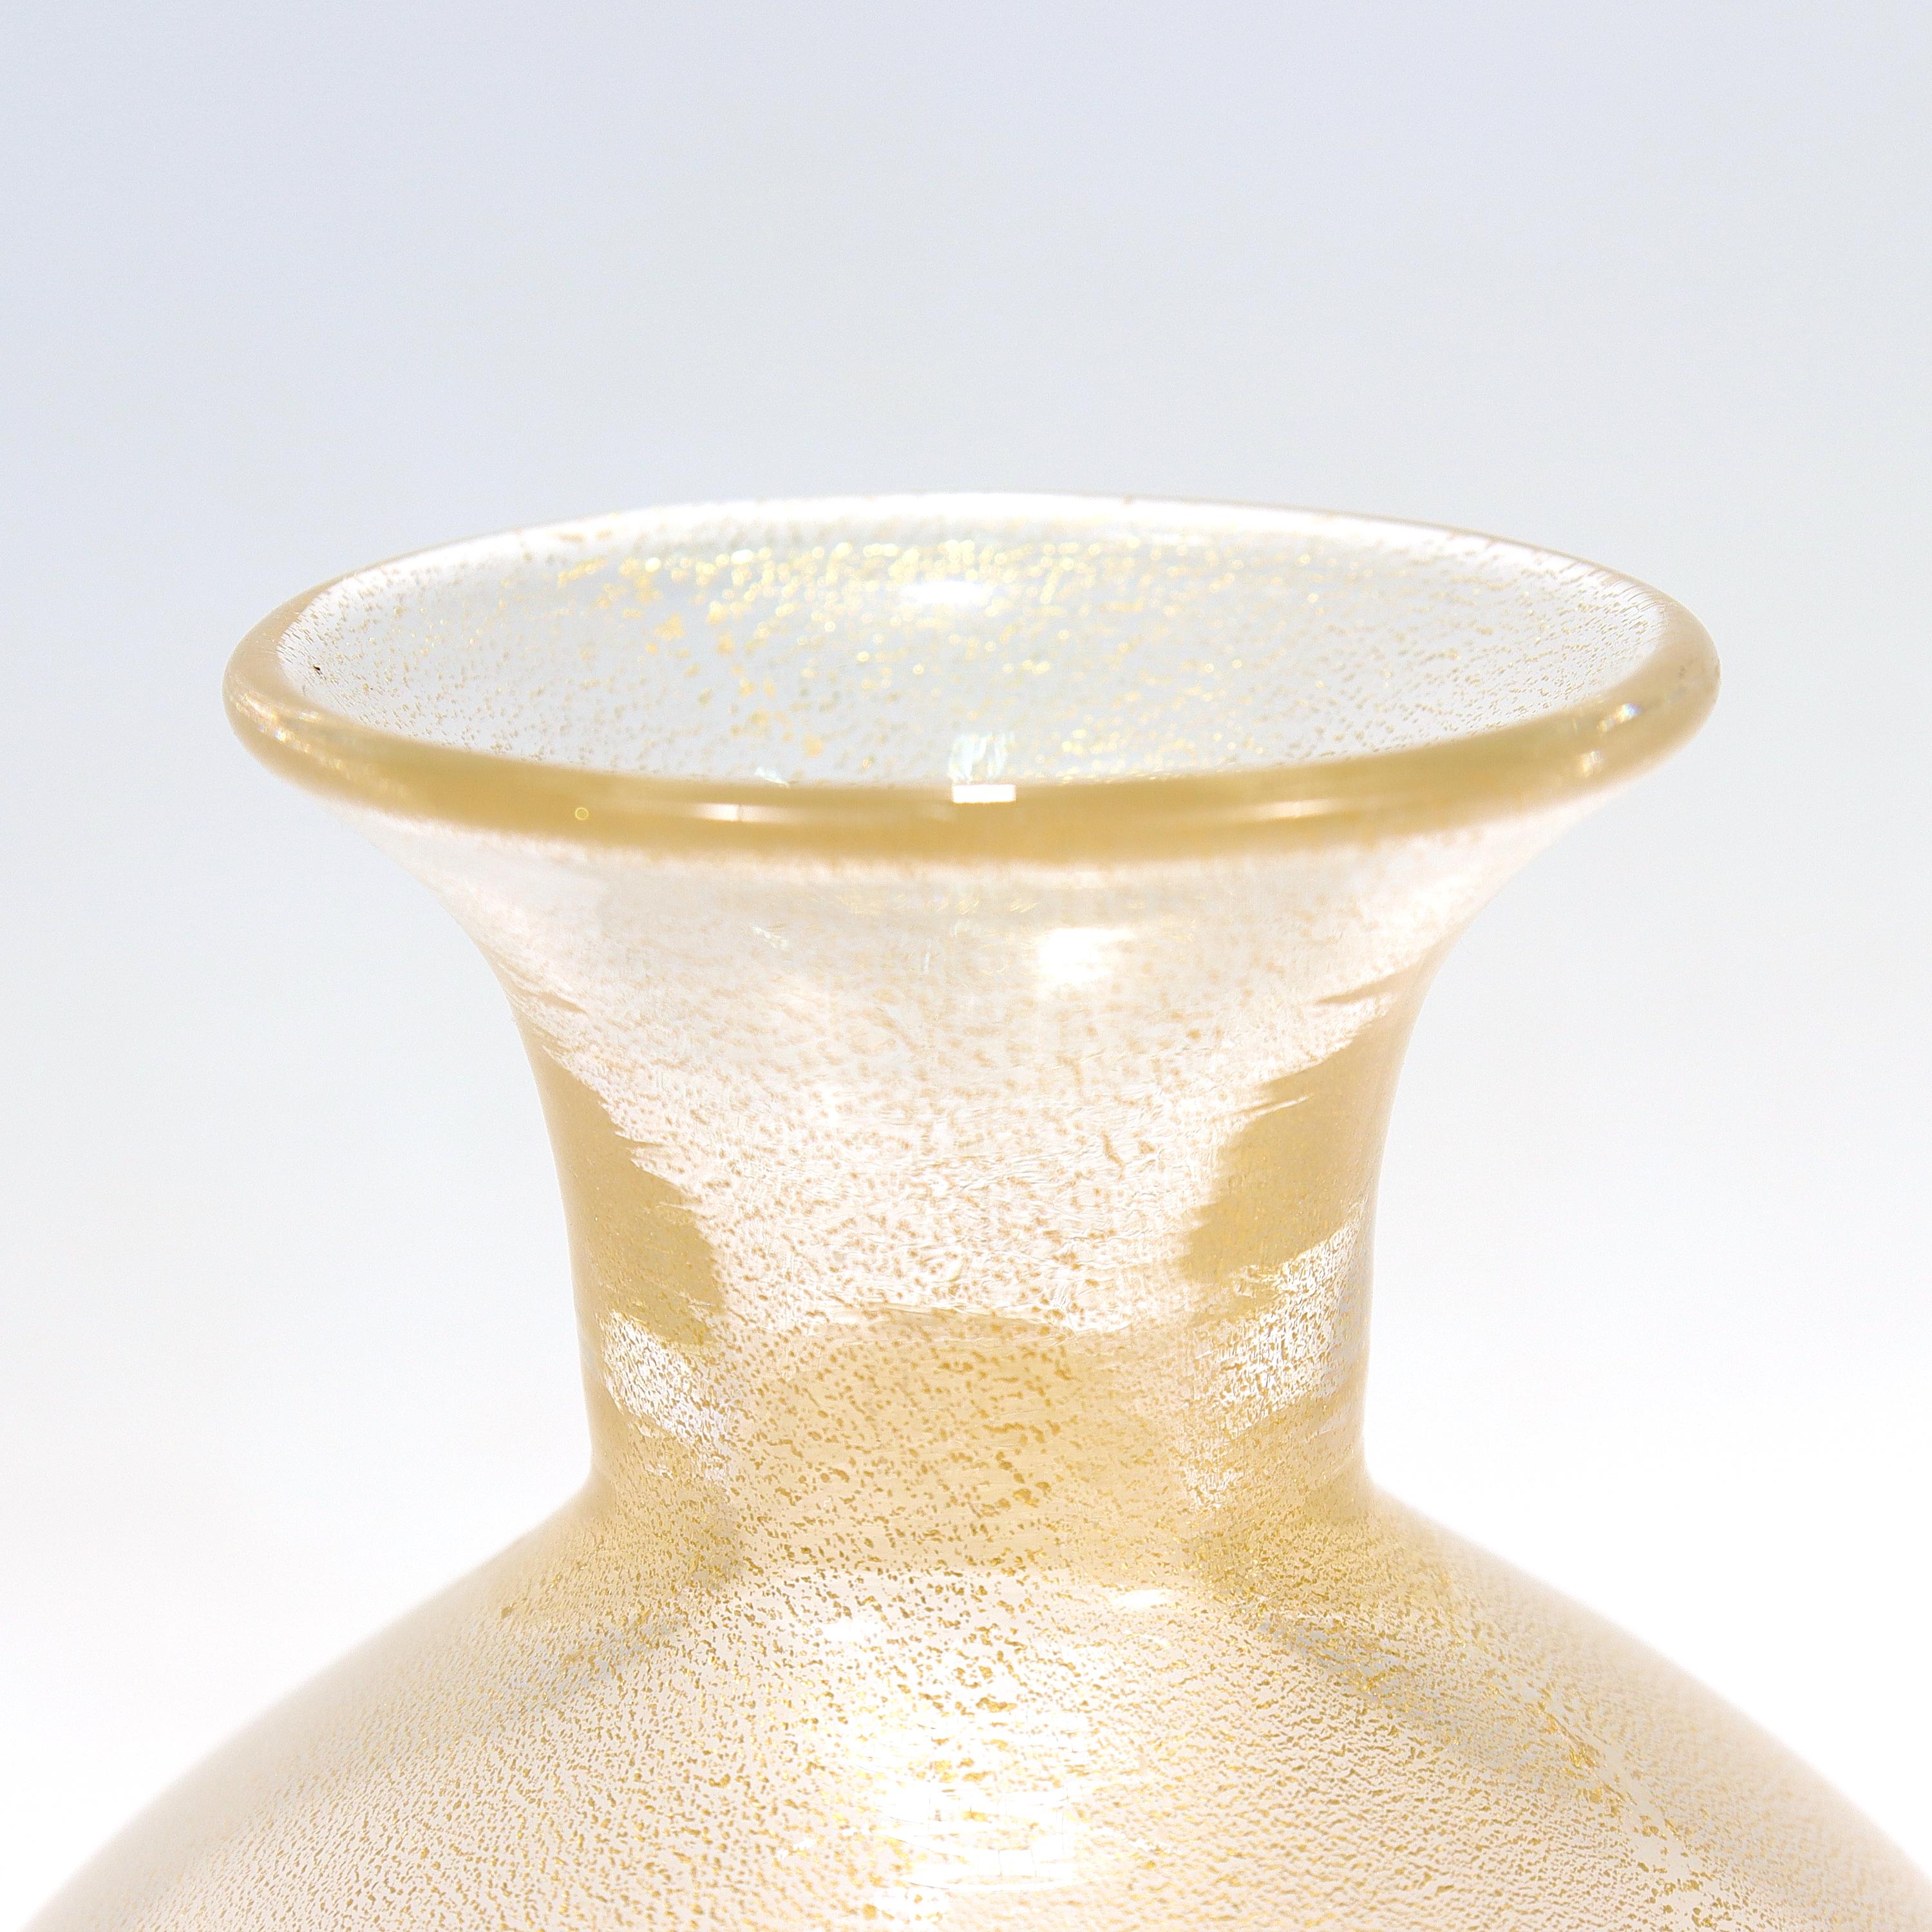 20th Century Signed Archimede Seguso Mid-Century Murano or Venetian Glass Vase with Gold Foil